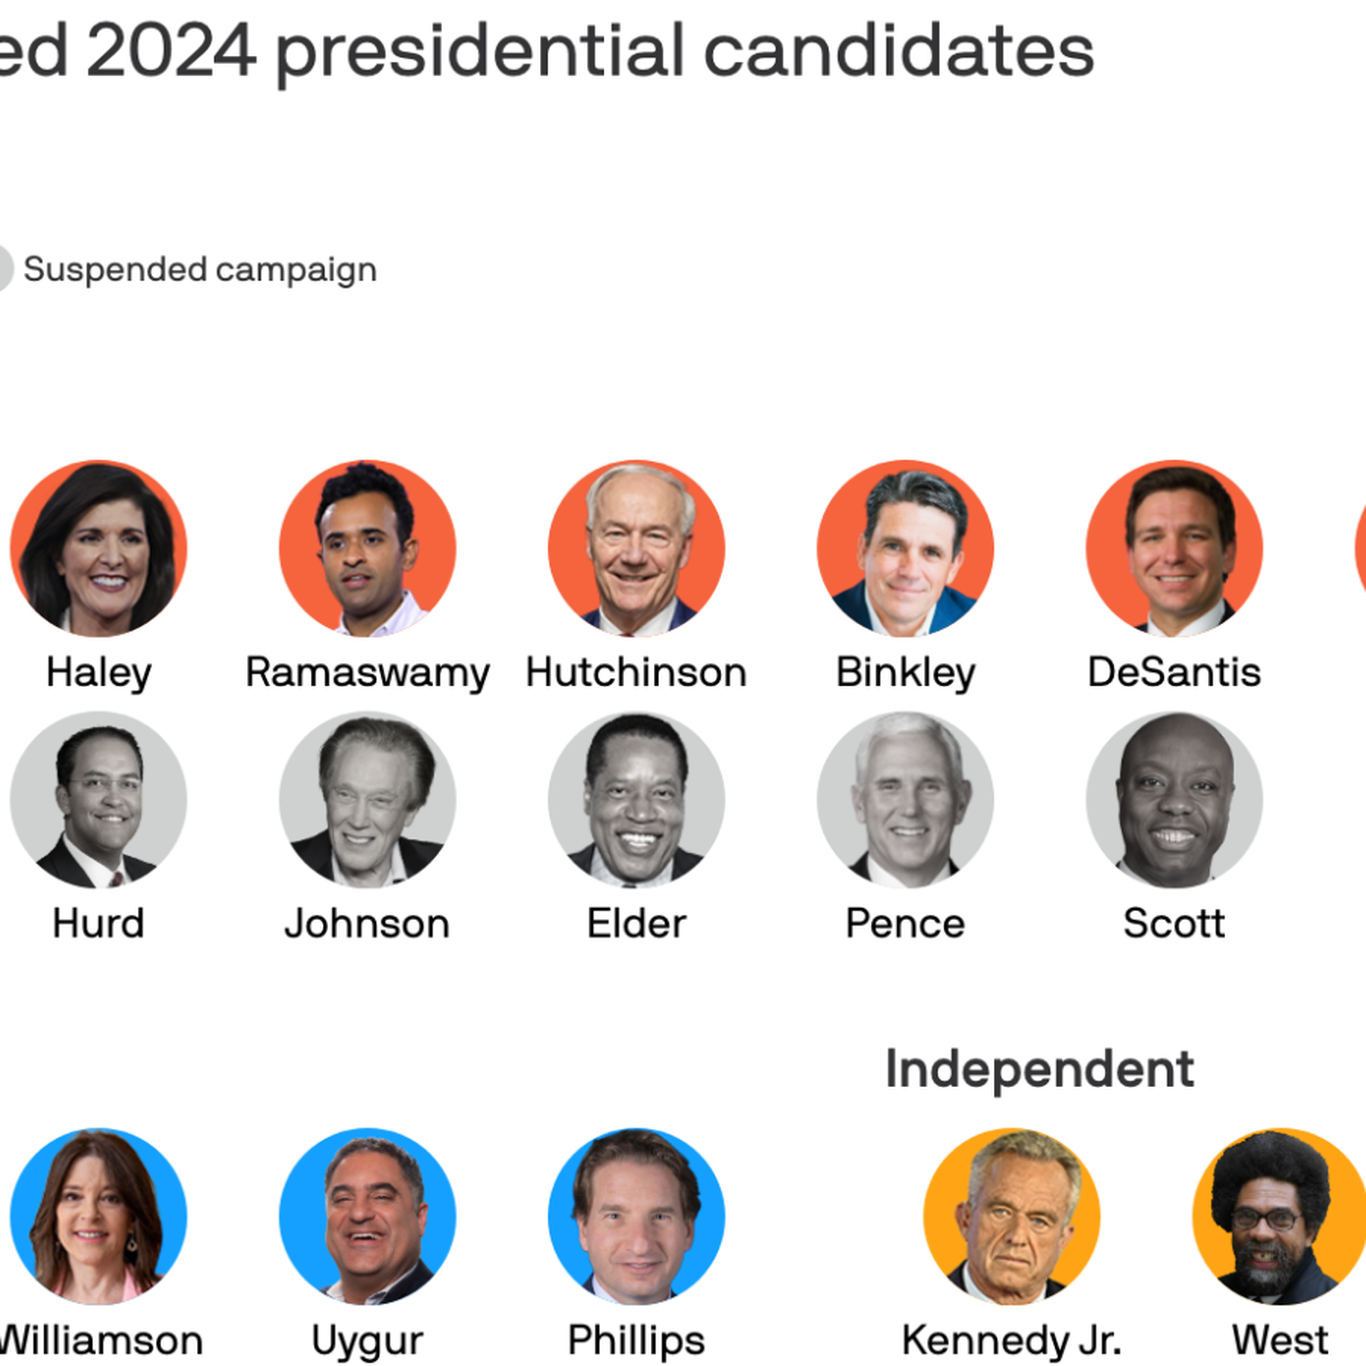 Why are there so many candidates for president?